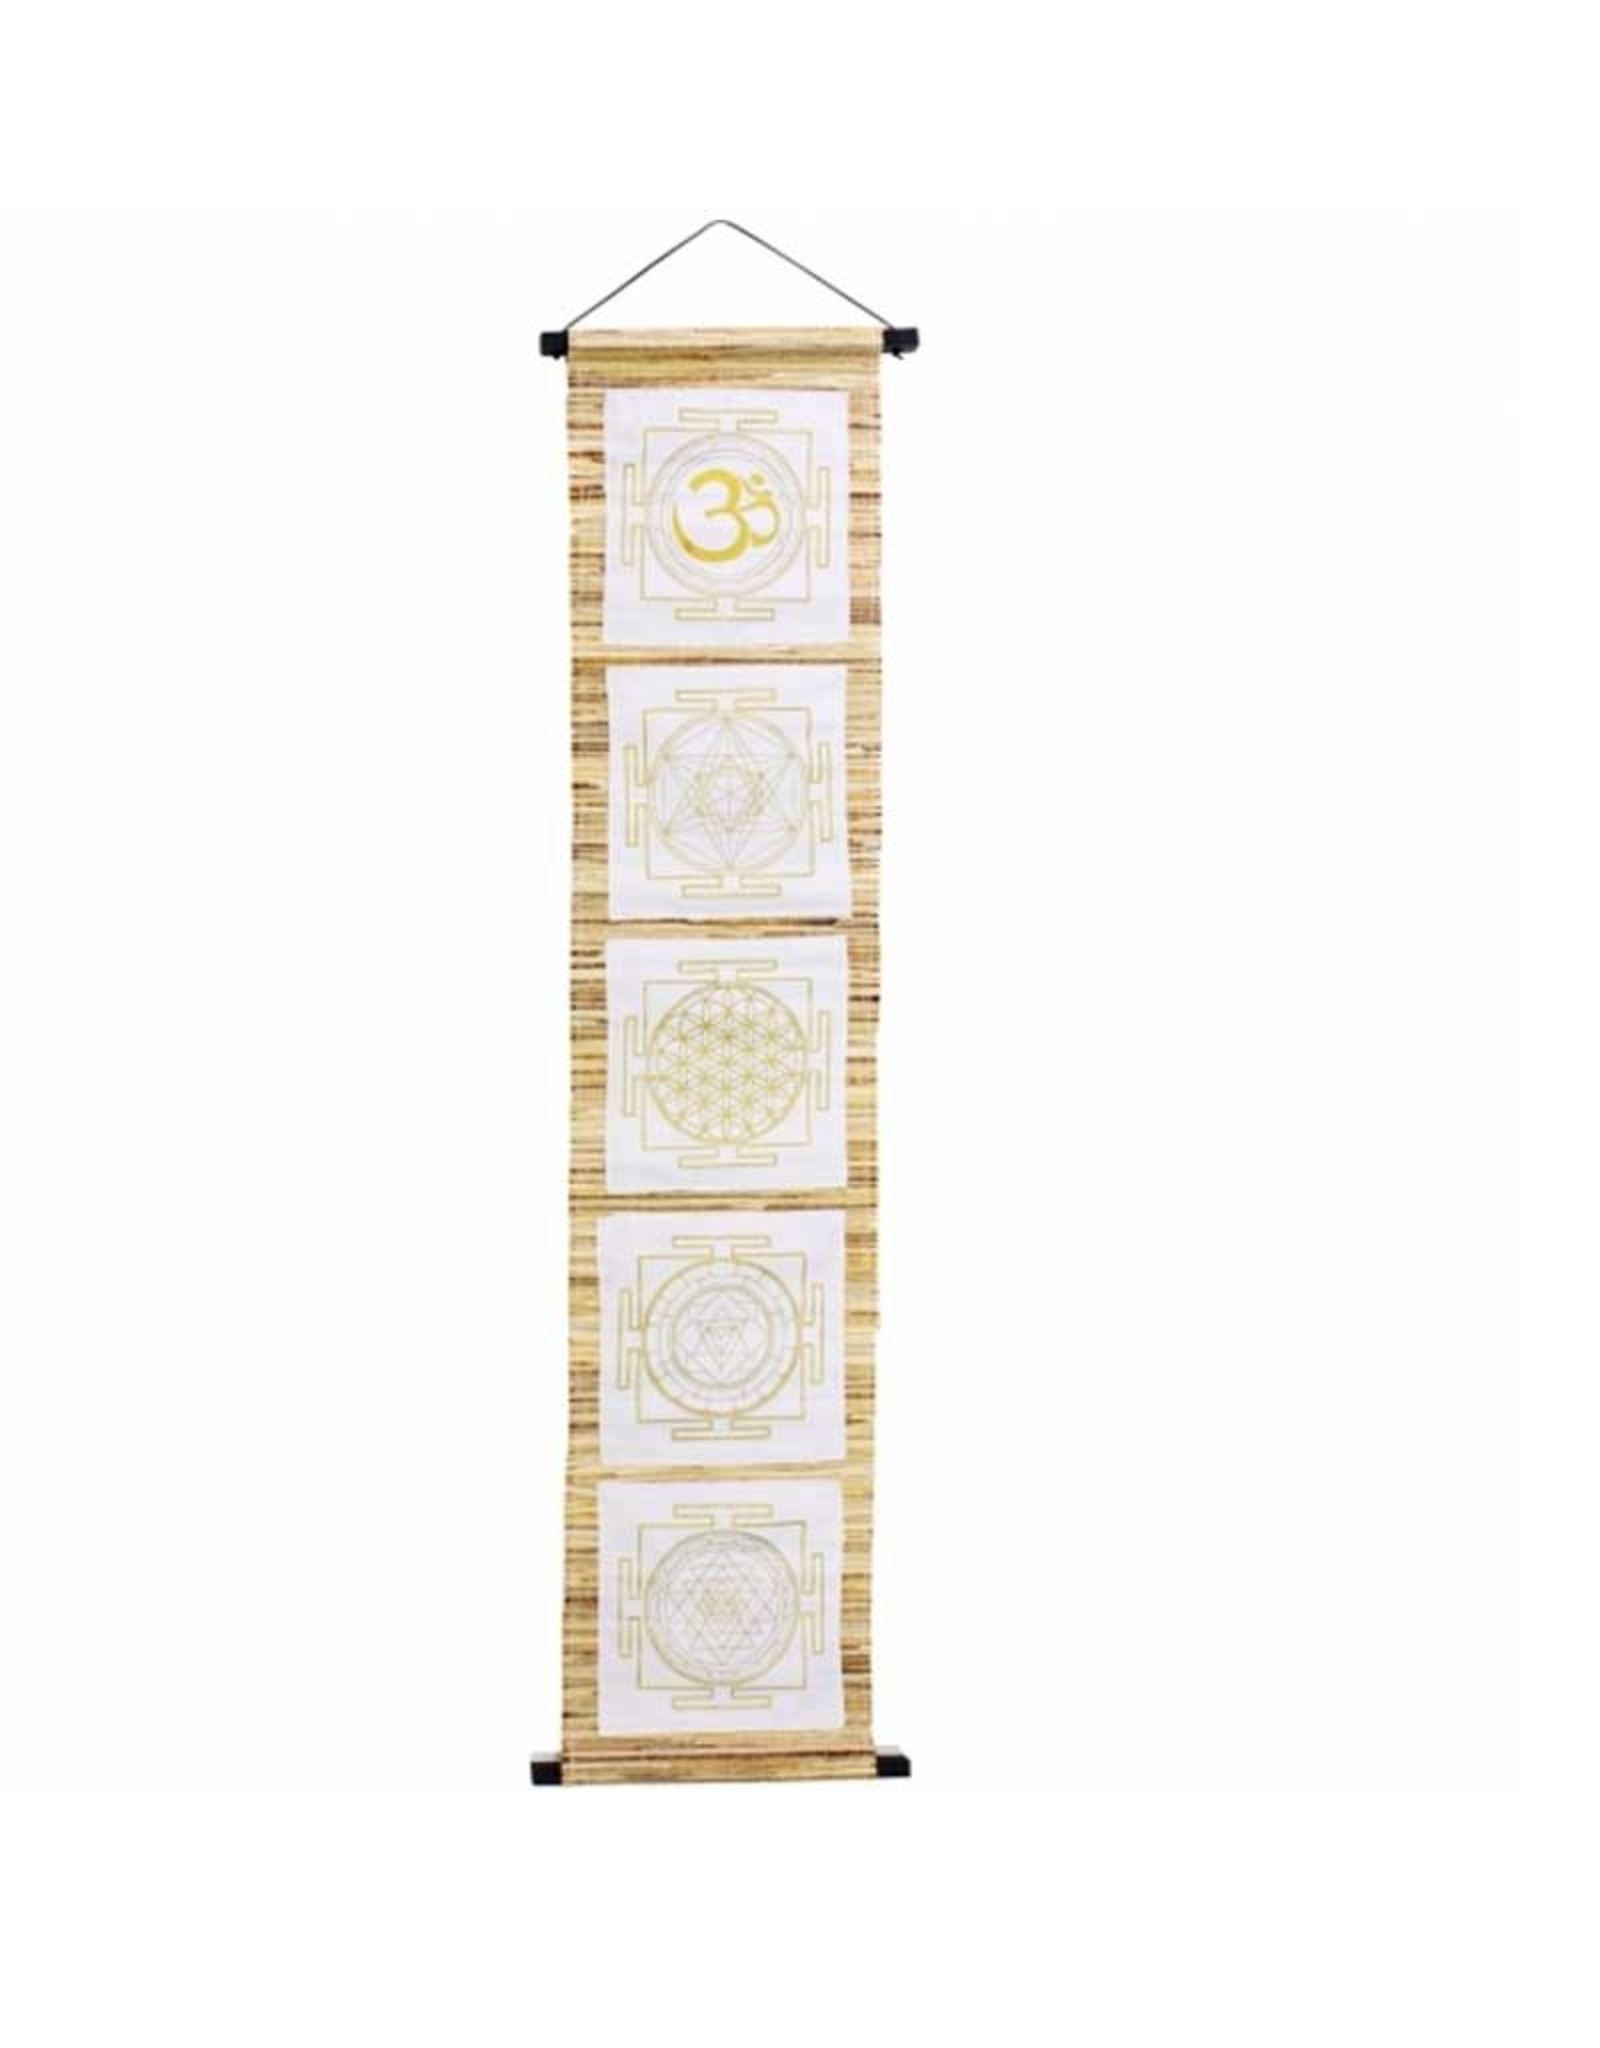 Sea Grass Banner with Sacred Geometry Symbols